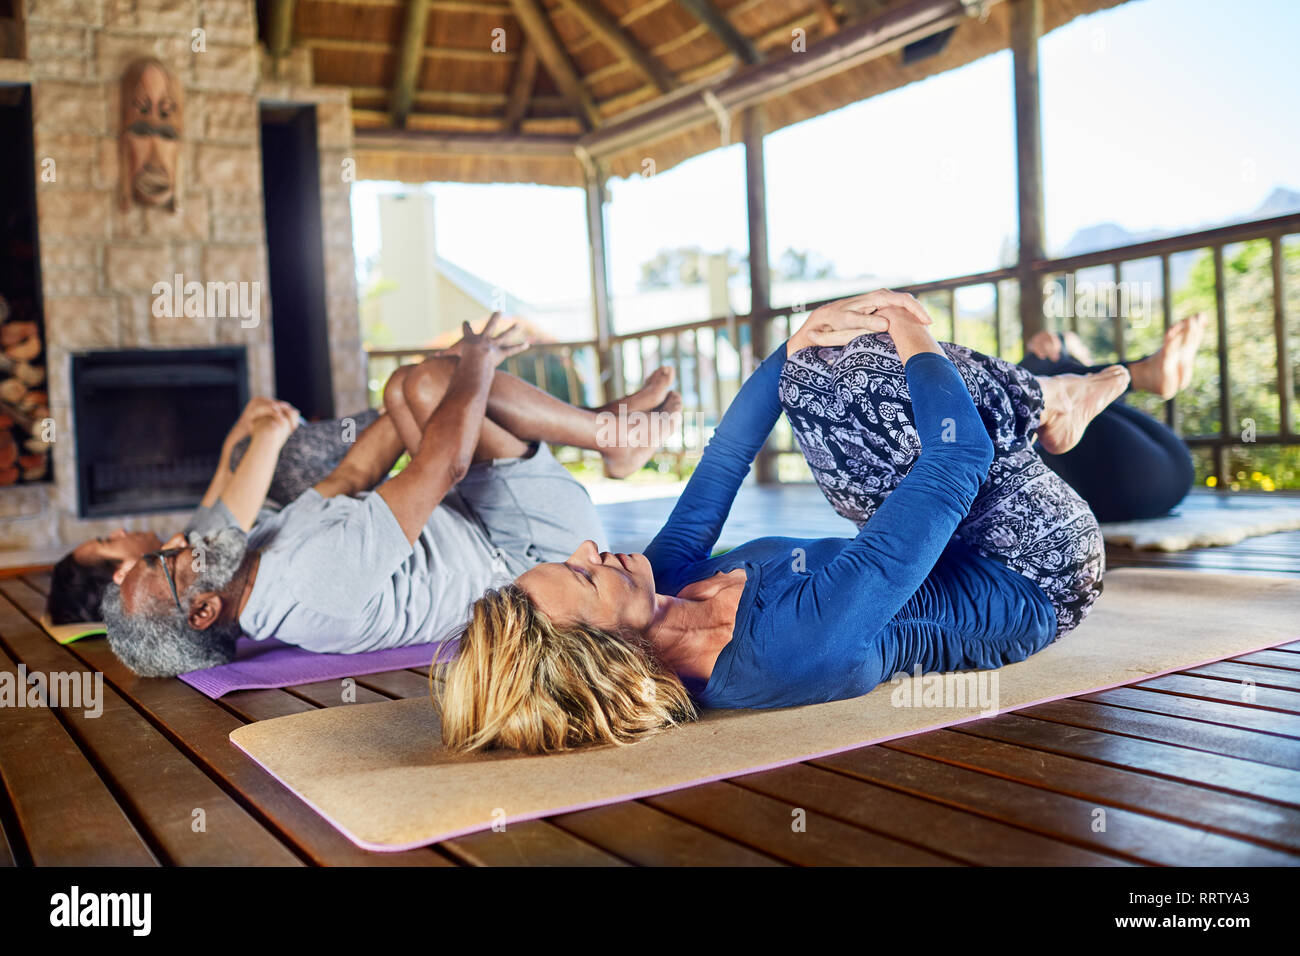 Yoga class stretching in hut during yoga retreat Stock Photo